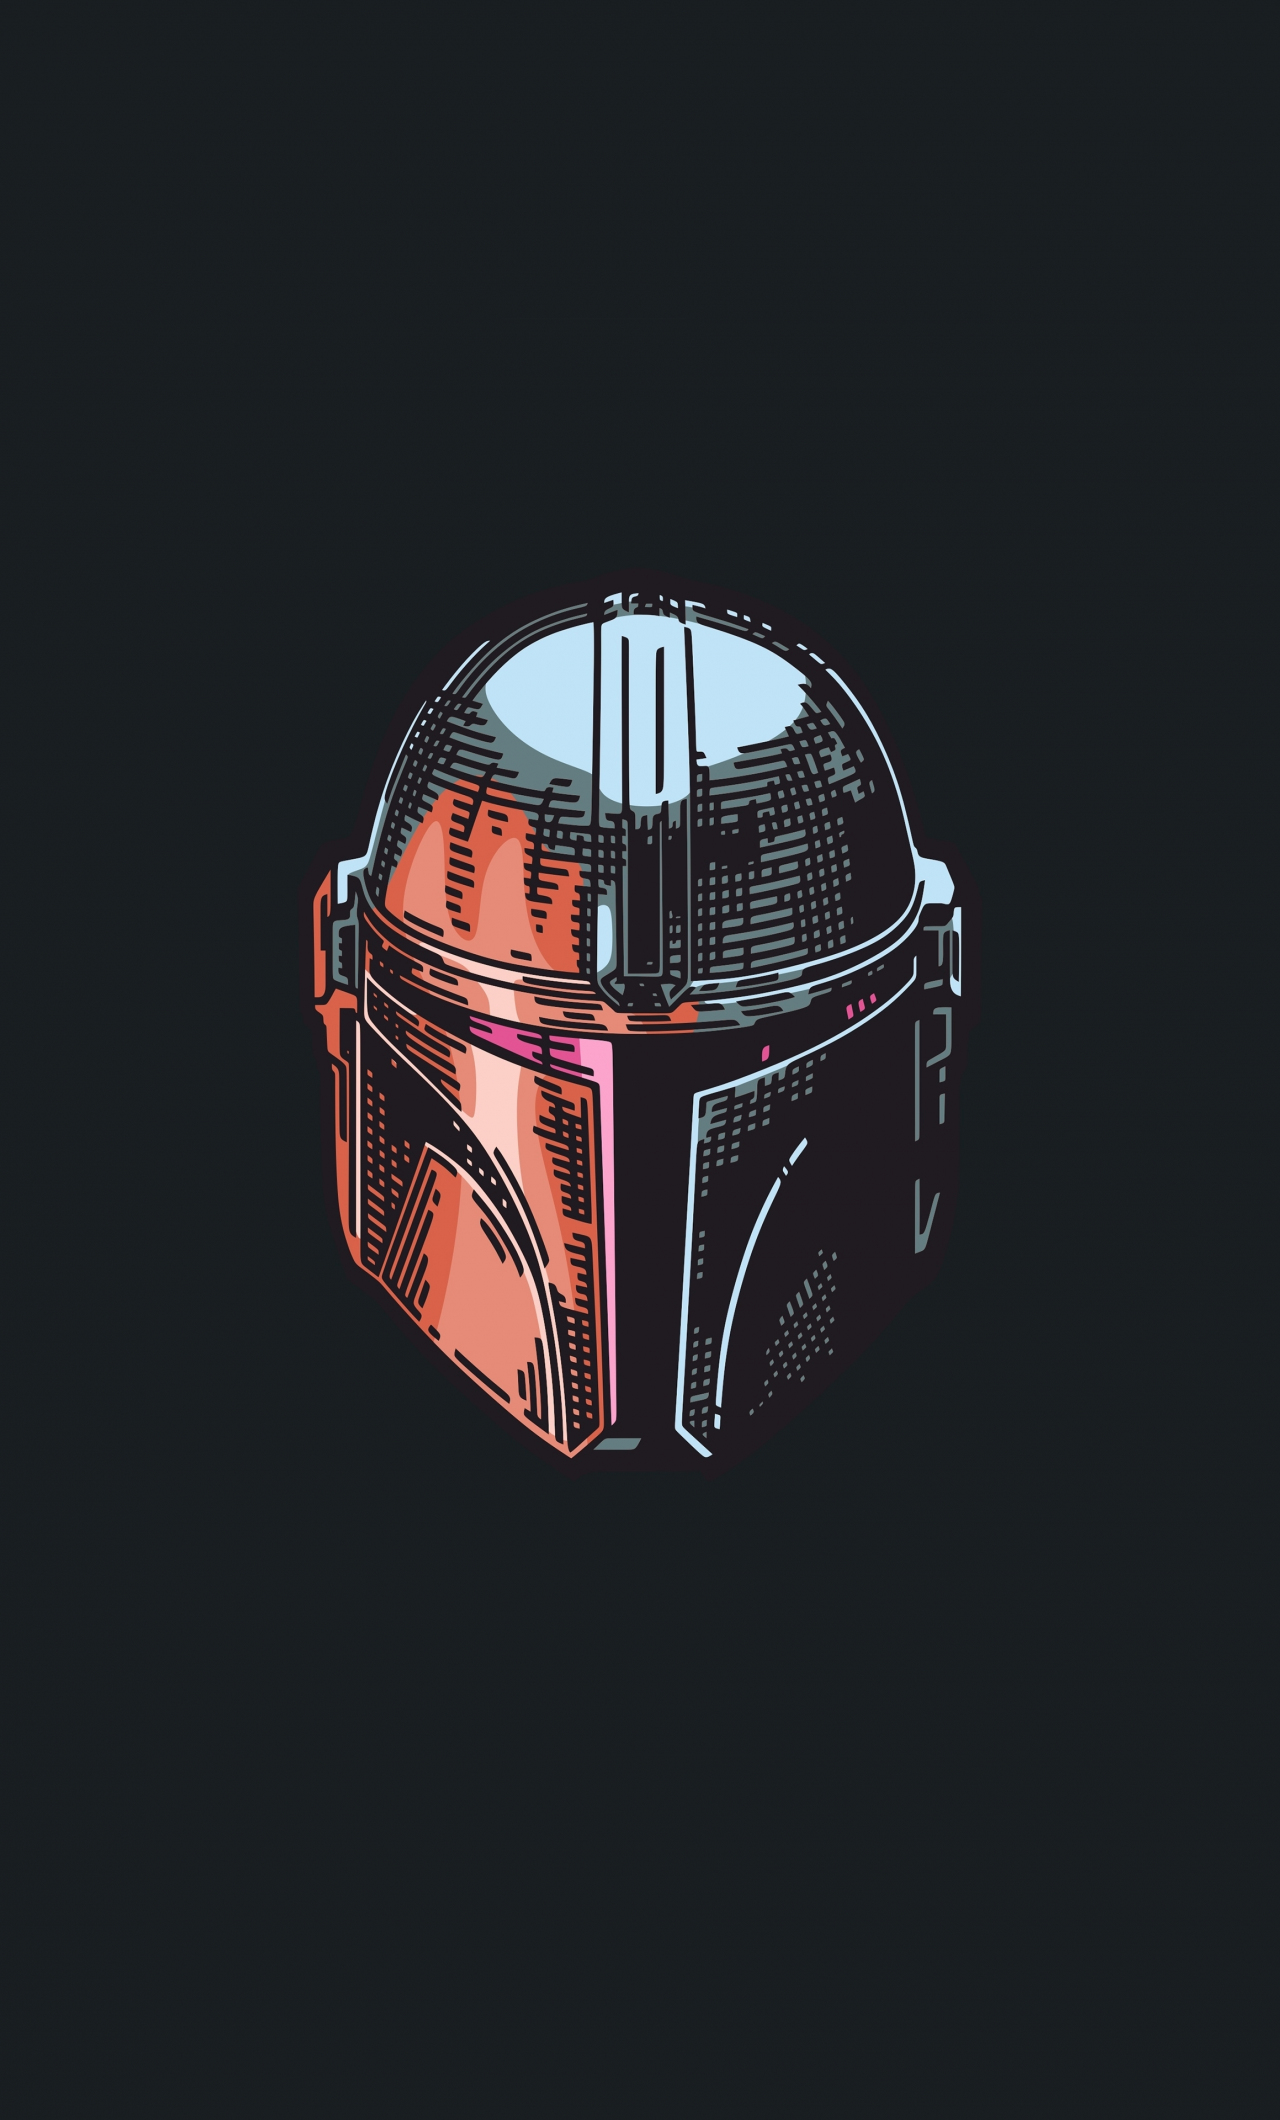 The Mandalorian wallpapers OLED iPhone screens edition